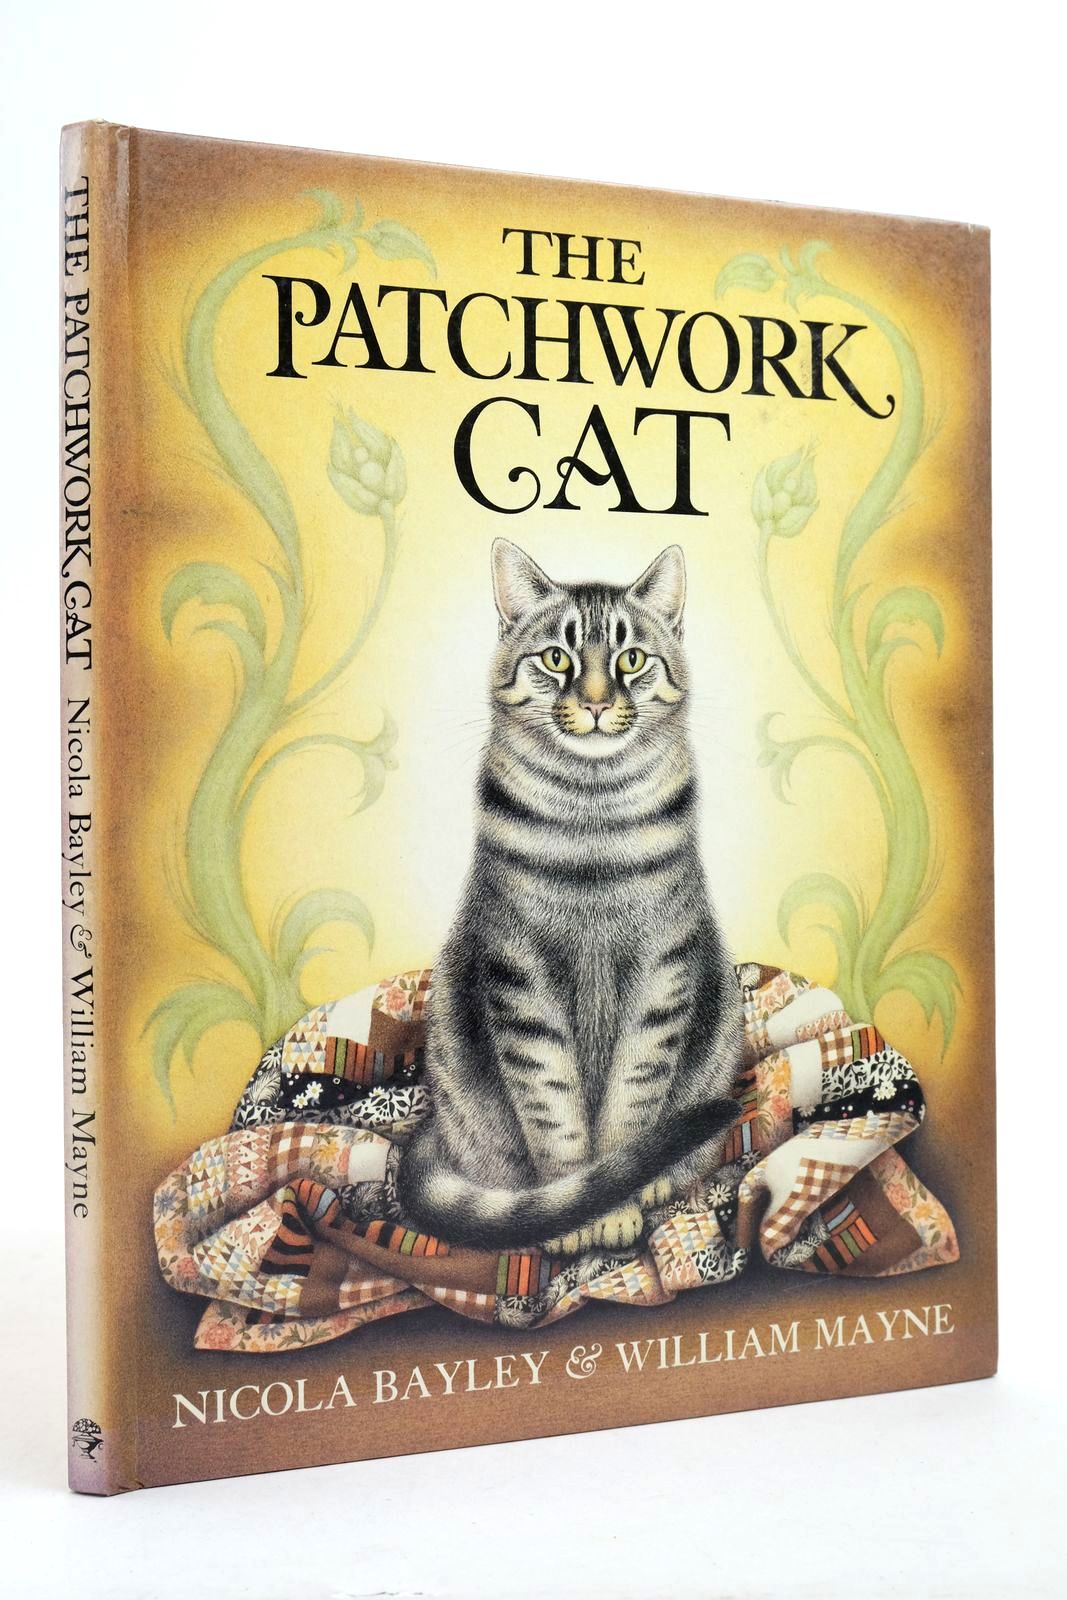 Photo of THE PATCHWORK CAT written by Mayne, William illustrated by Bayley, Nicola published by Jonathan Cape (STOCK CODE: 2140276)  for sale by Stella & Rose's Books